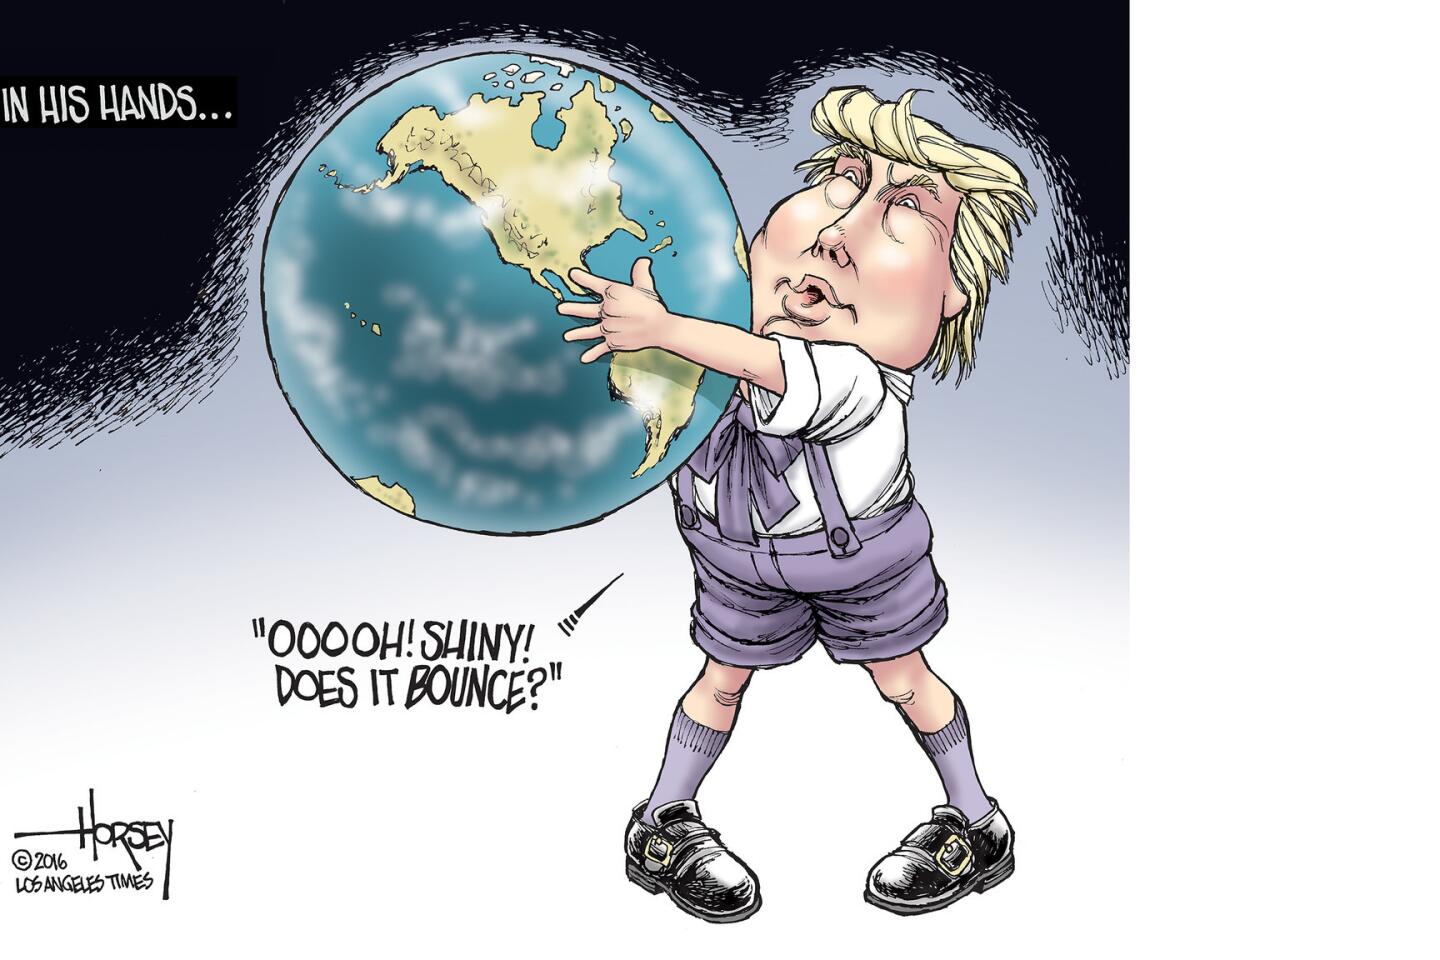 Donald Trump has the whole world in his hands.